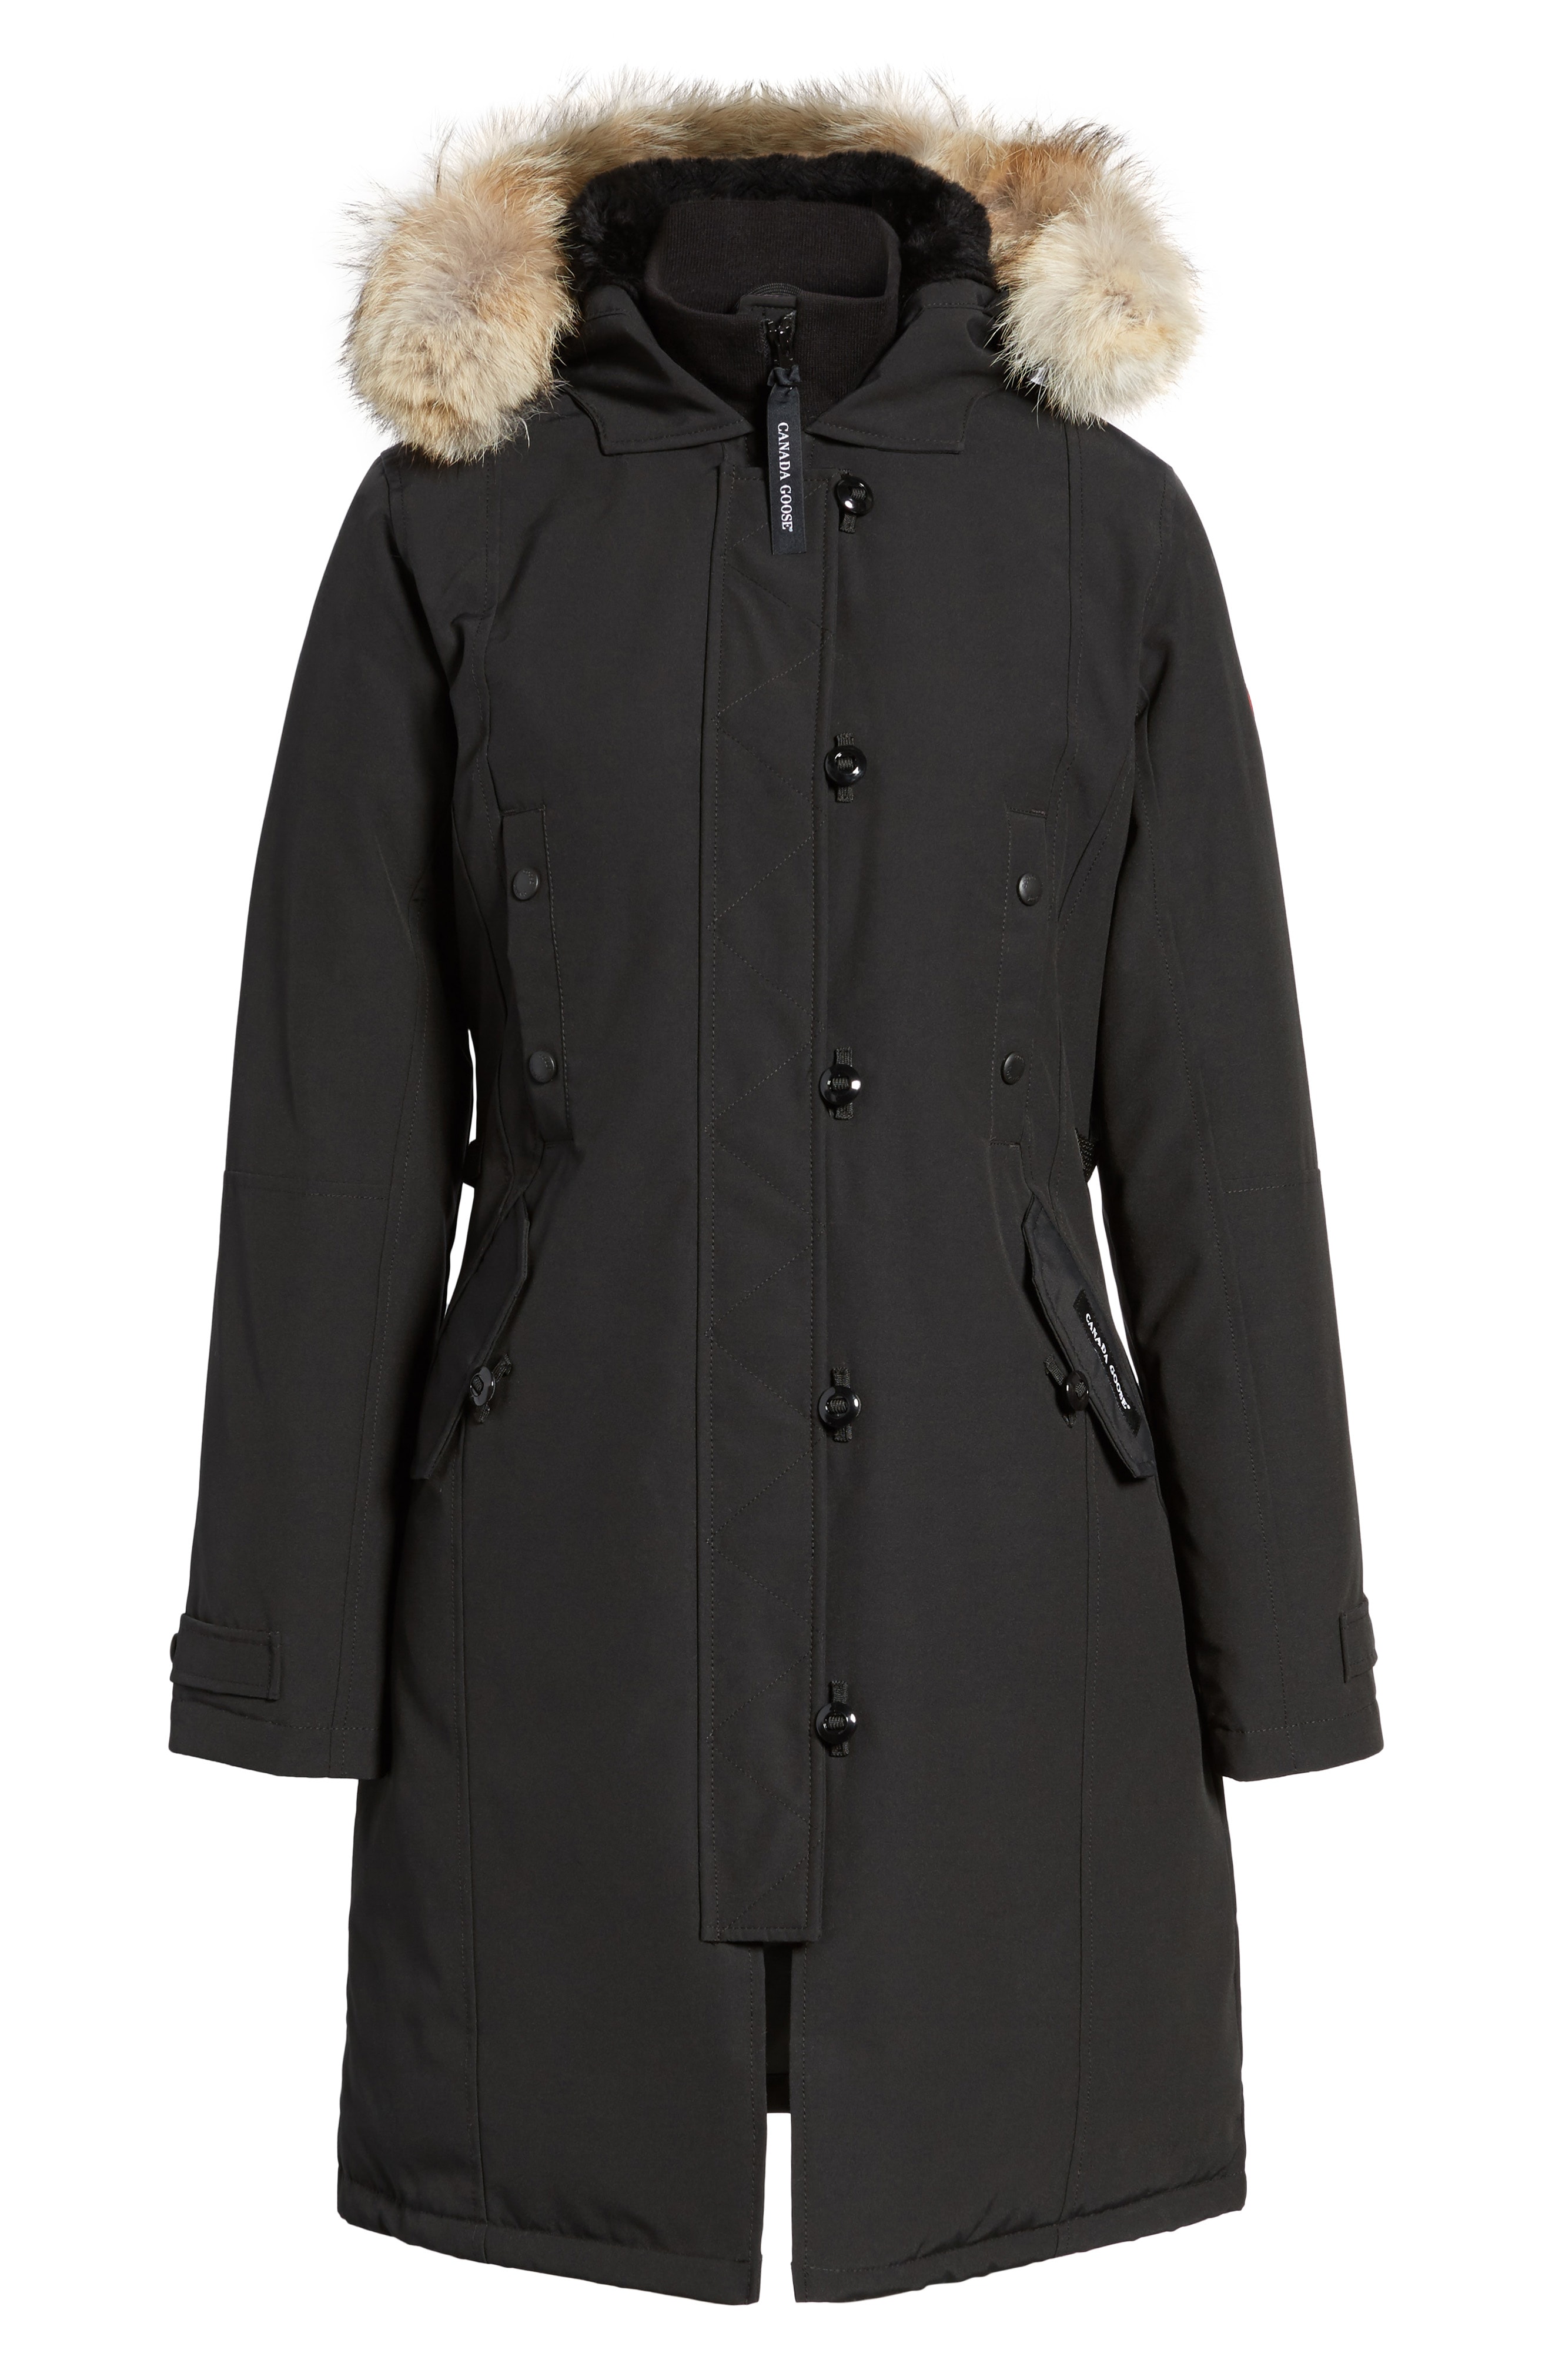 Black Parkas – a classic under the coats for autumn and winter